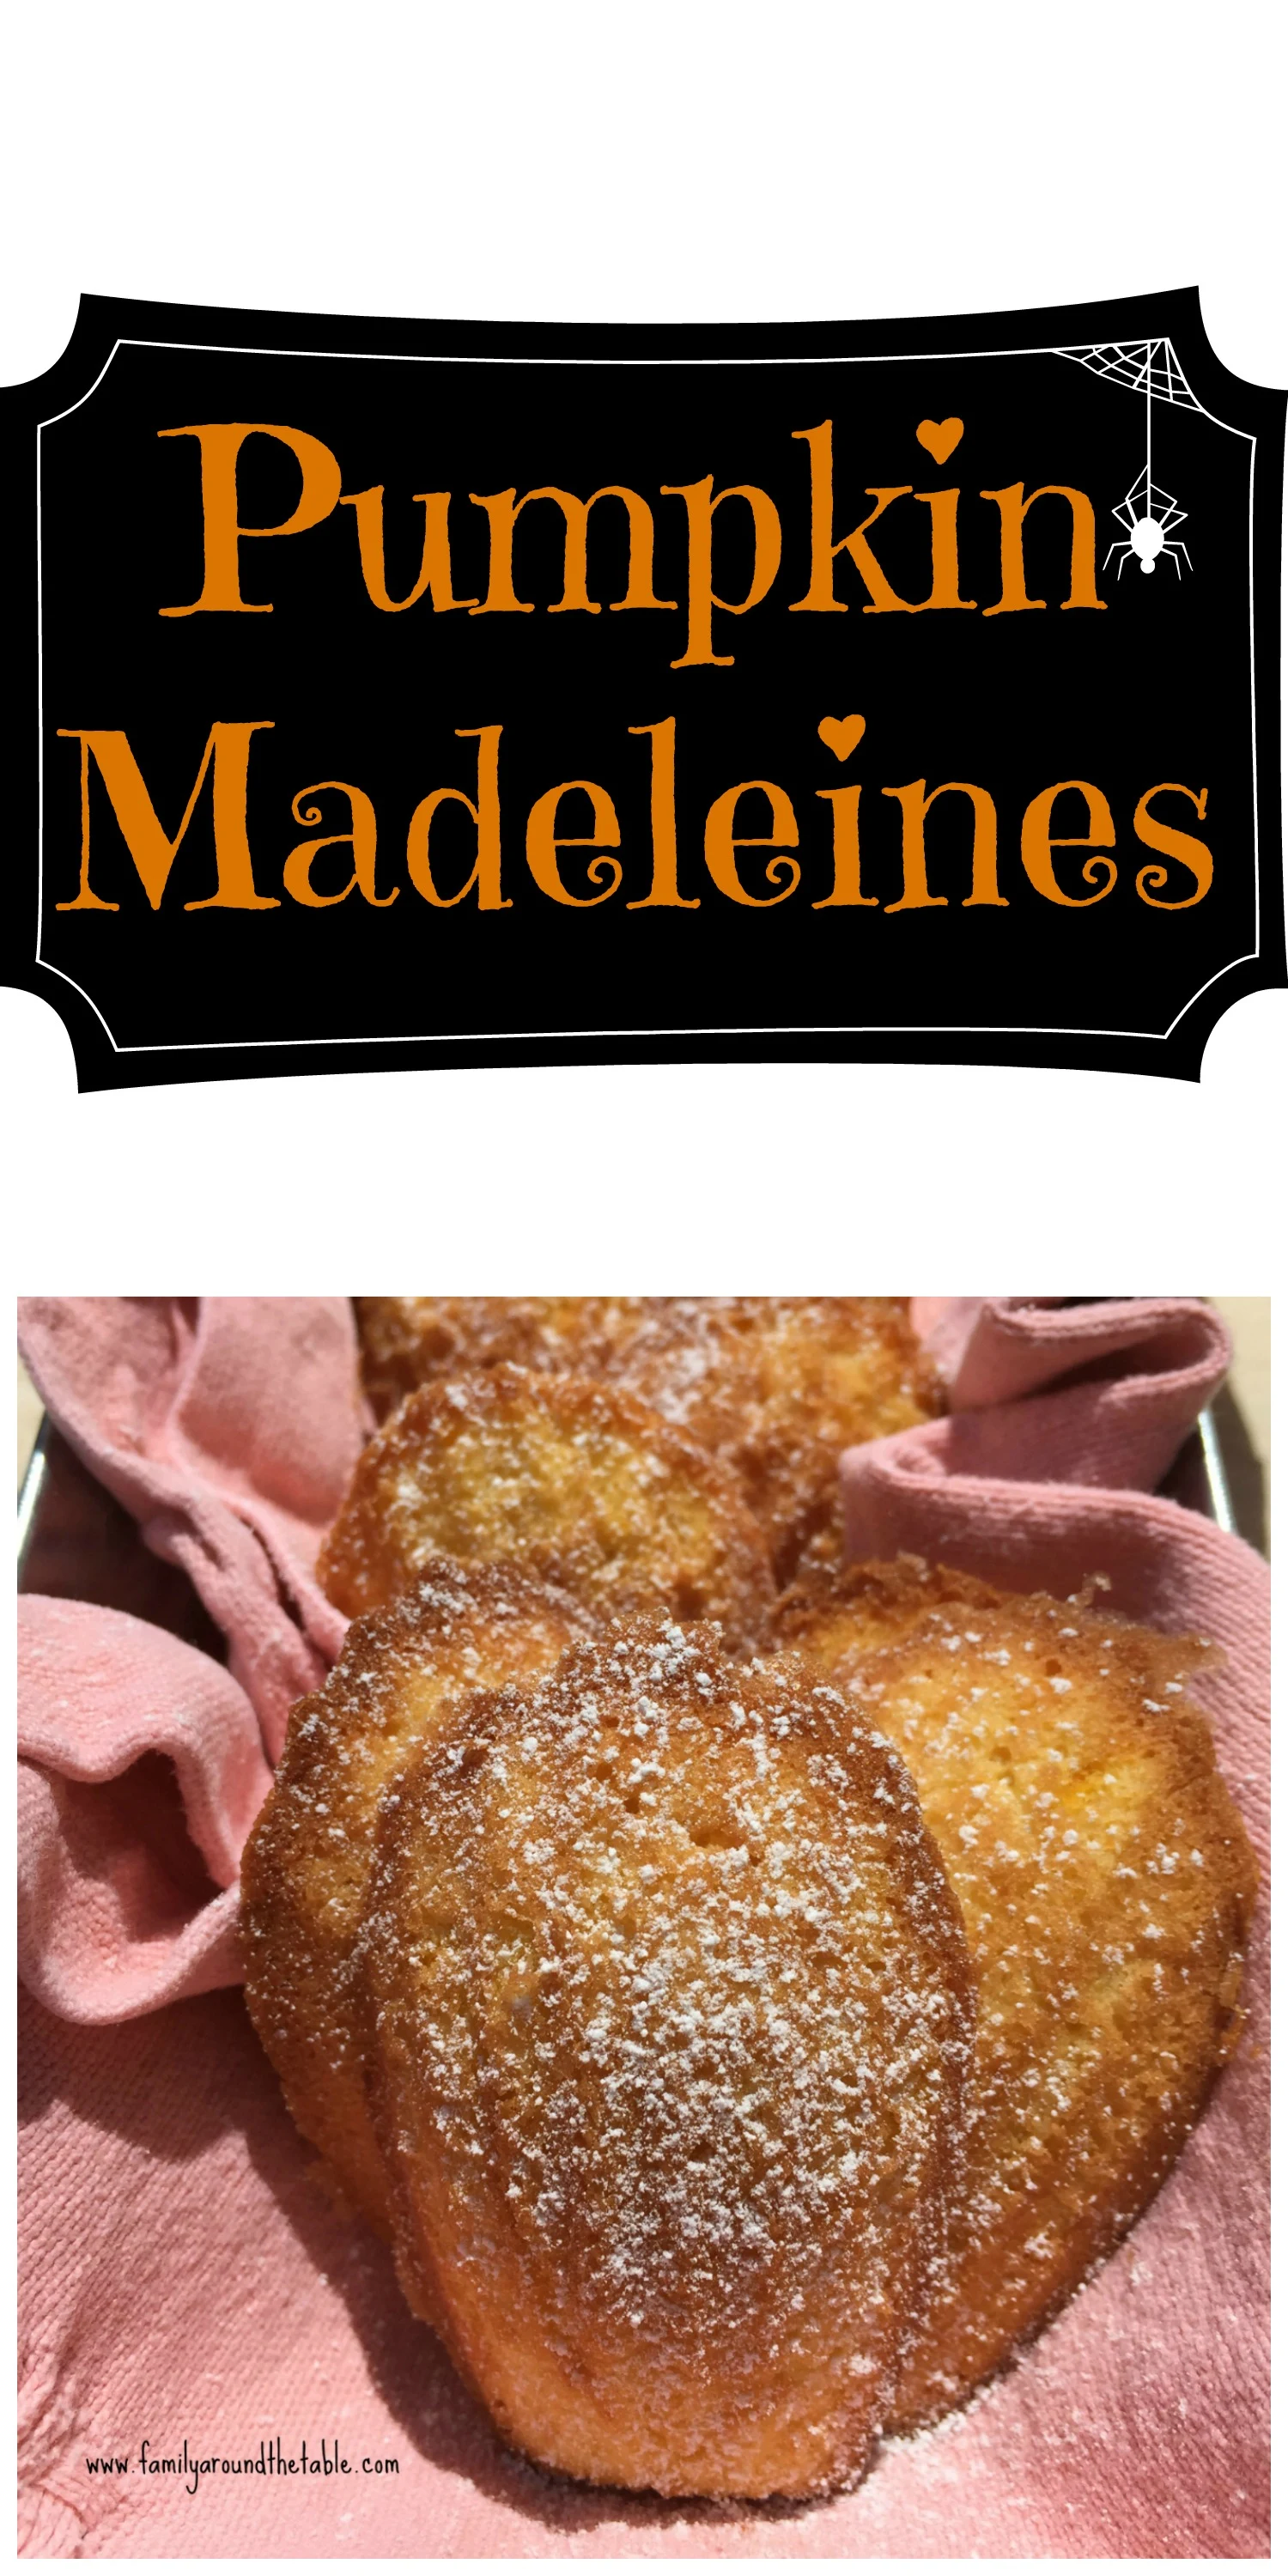 Pumpkin madeleines are a delicious fall treat.